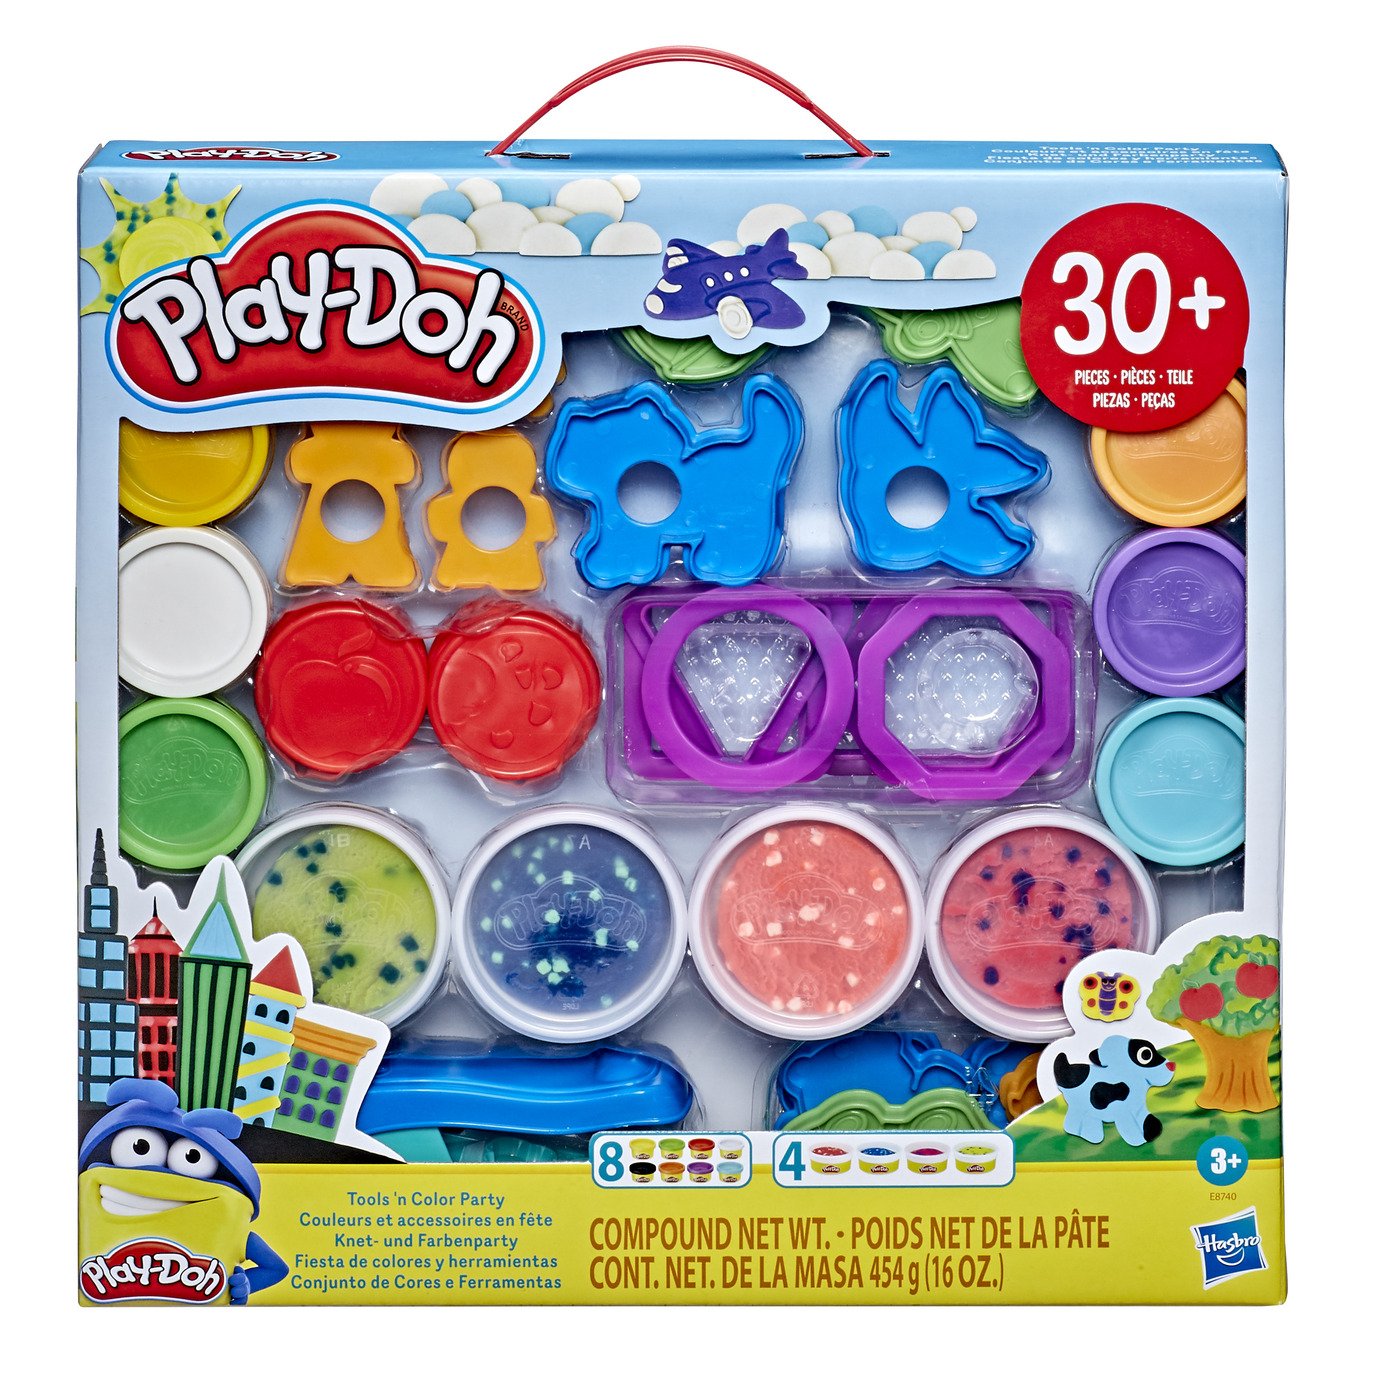 Play-Doh Tools and Colour Party Arts and Crafts Activity Set Review